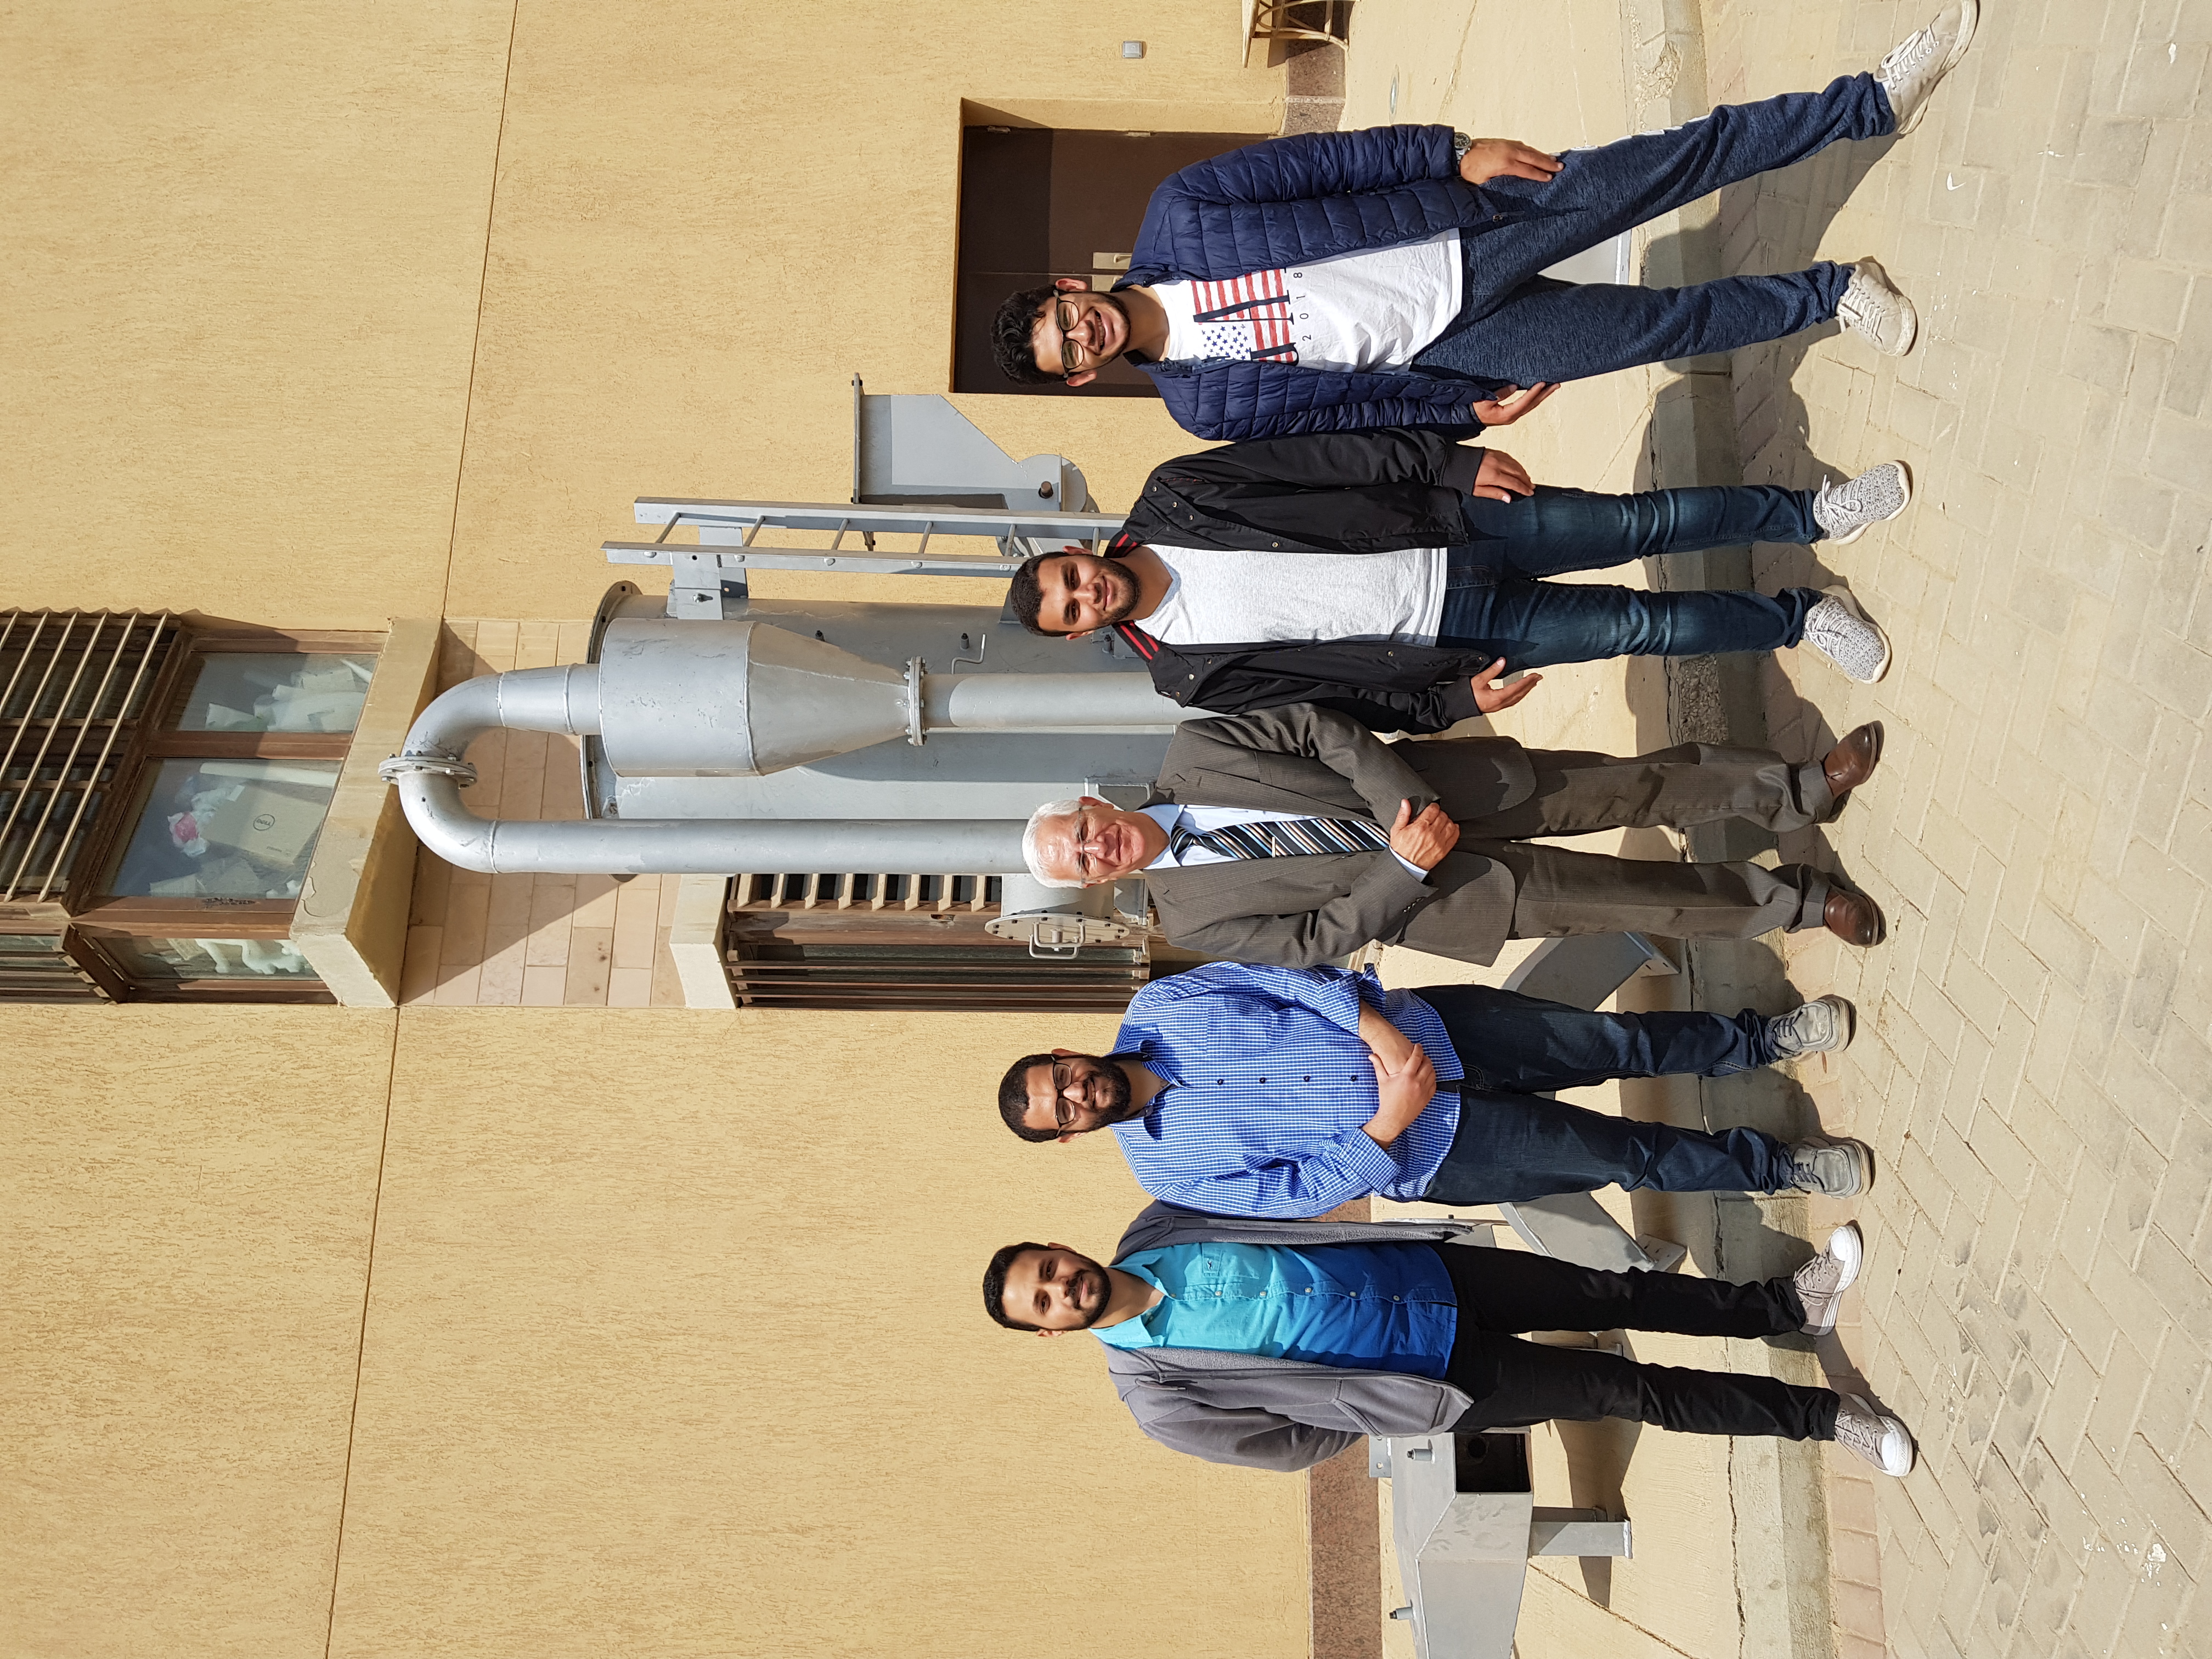 Mohy Mansour, adjunct professor of mechanical engineering, with students on campus